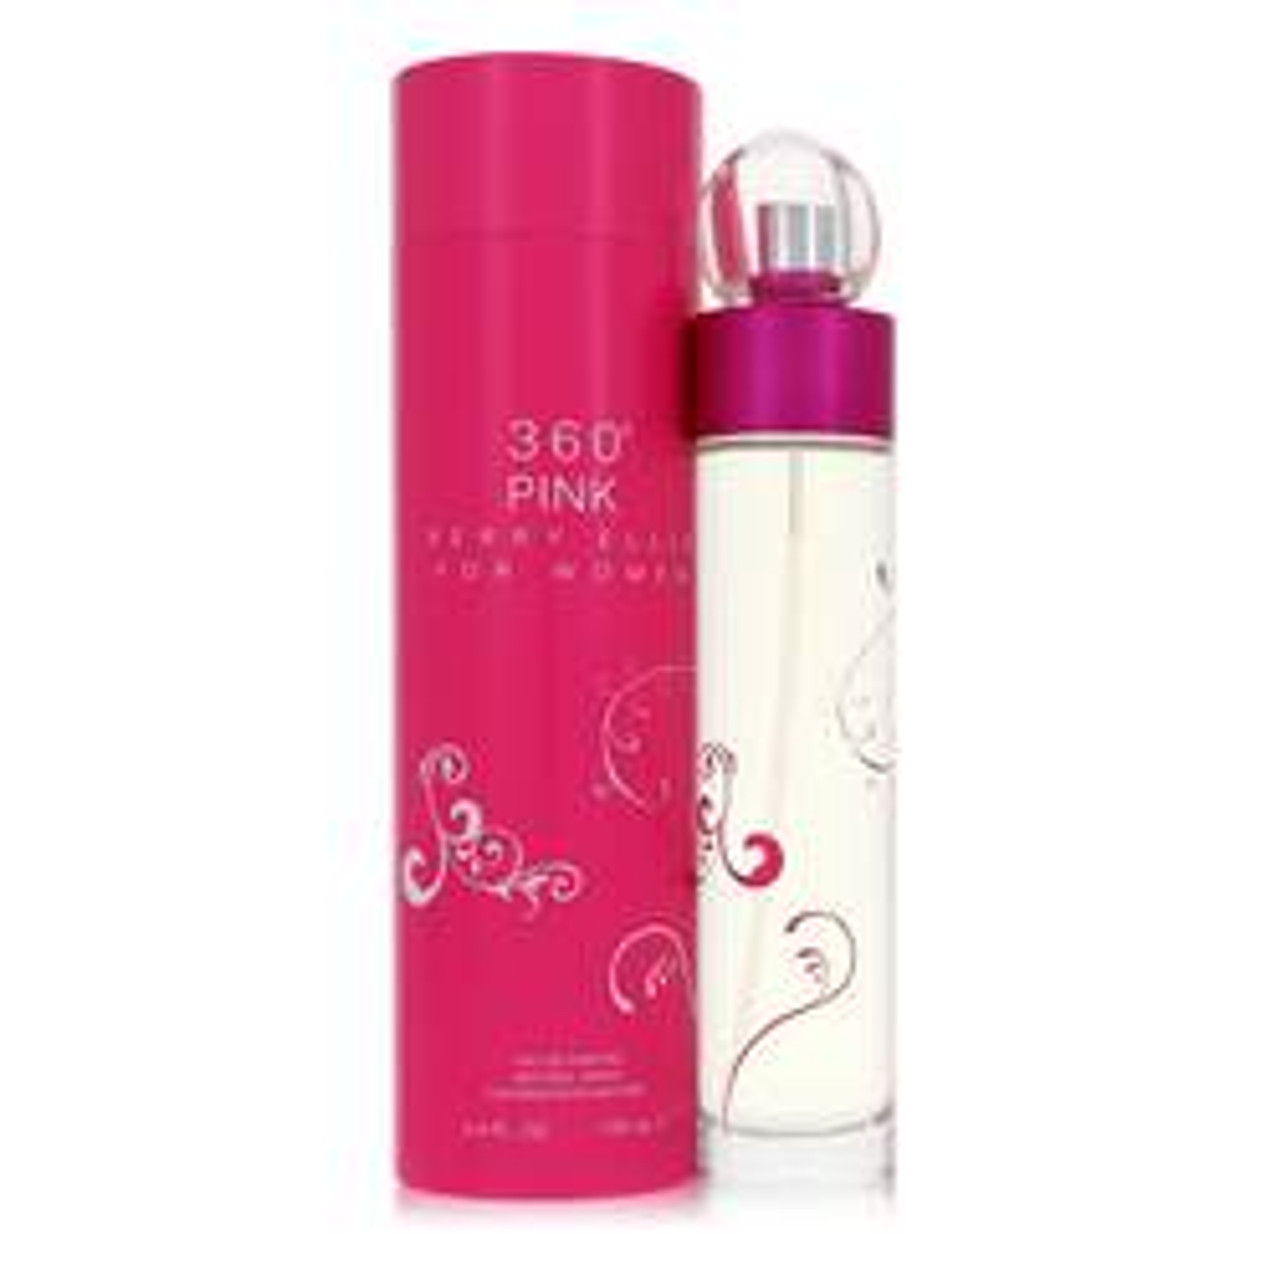 Perry Ellis 360 Pink Perfume By Perry Ellis Eau De Parfum Spray 3.4 oz for Women - [From 71.00 - Choose pk Qty ] - *Ships from Miami